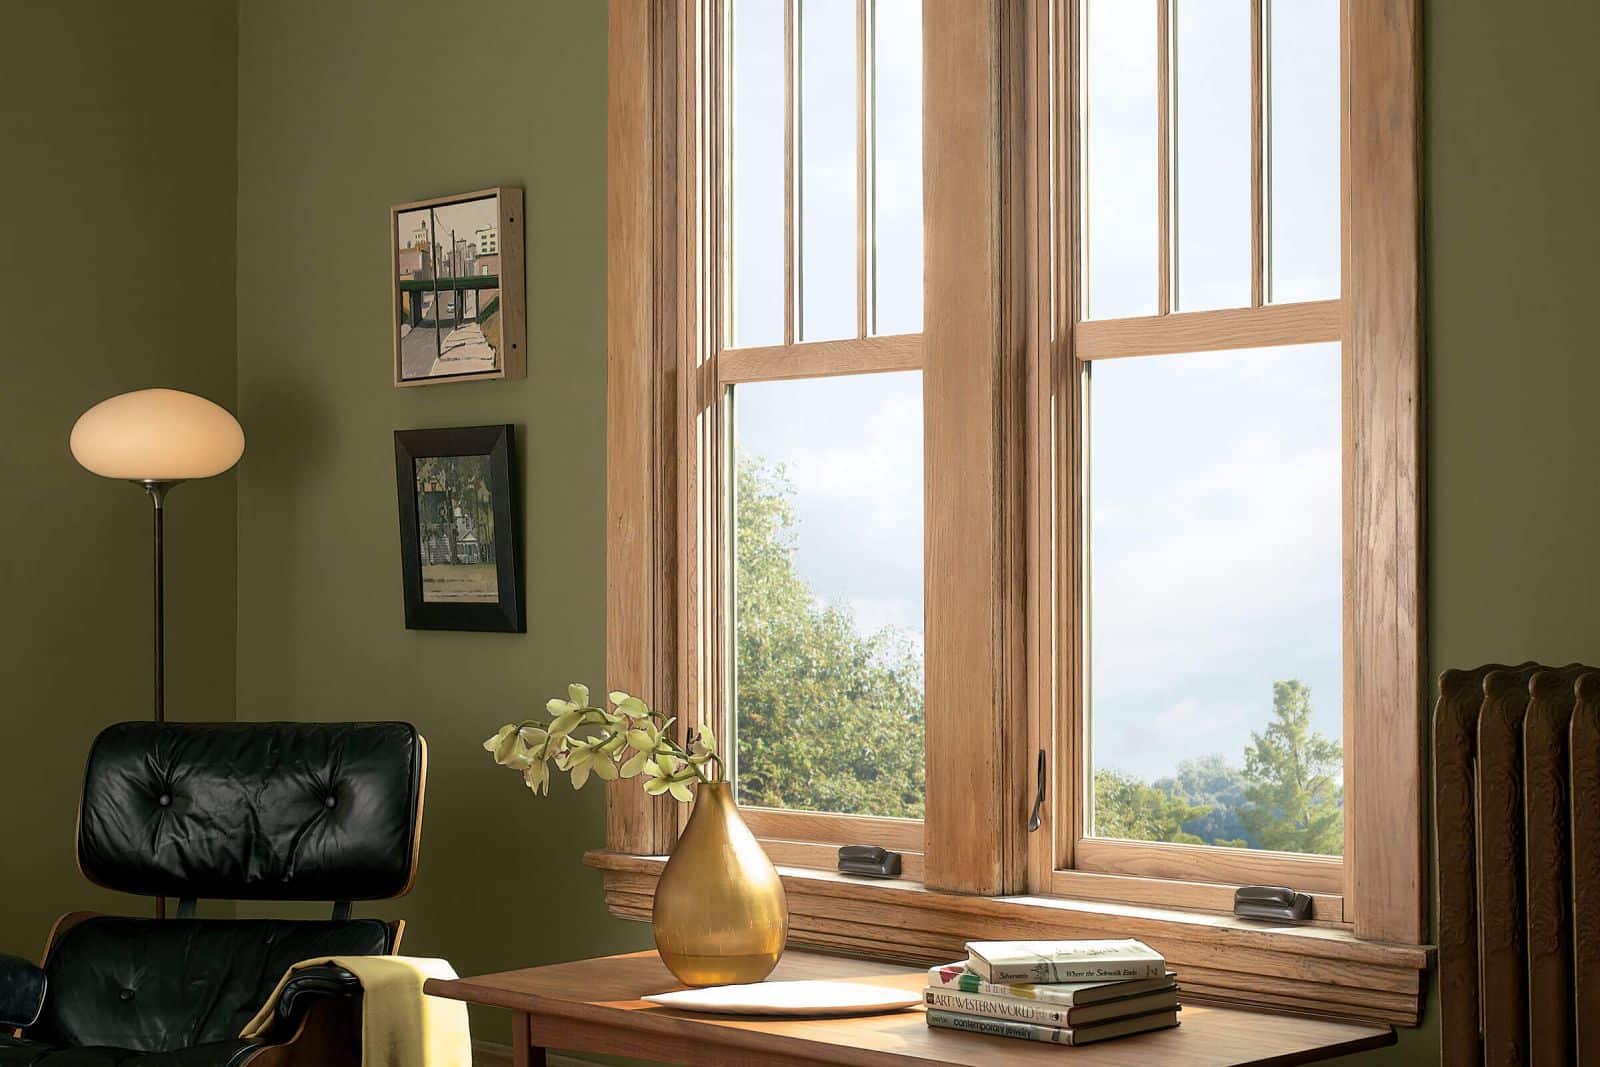 A home office corner with wooden ultimate case window frames.